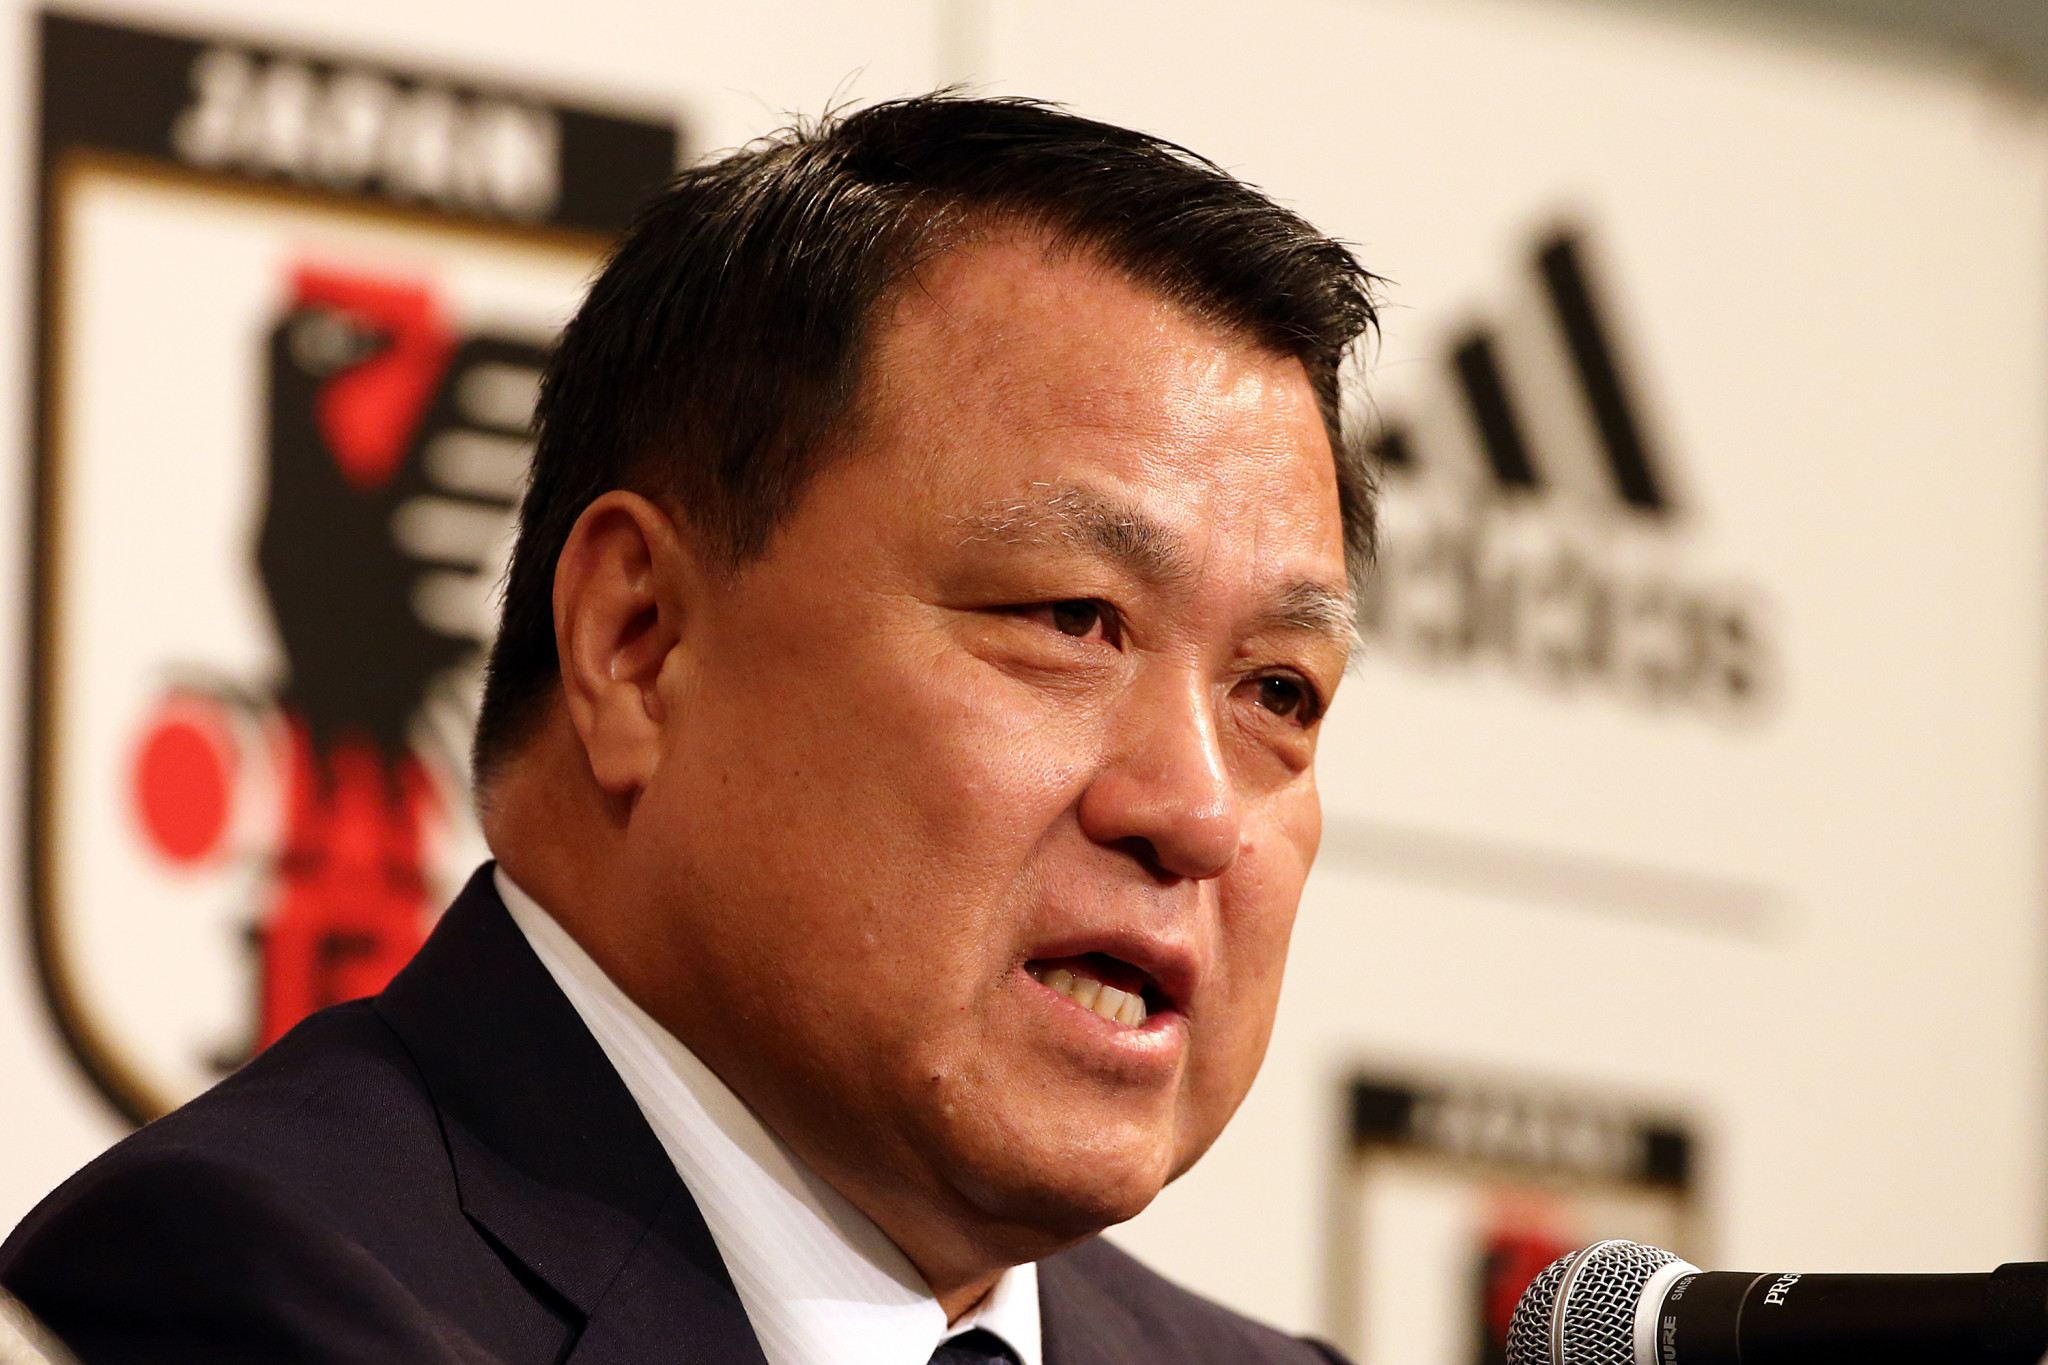 Japan Football Association President wants sports world to lead by example after recovering from COVID-19